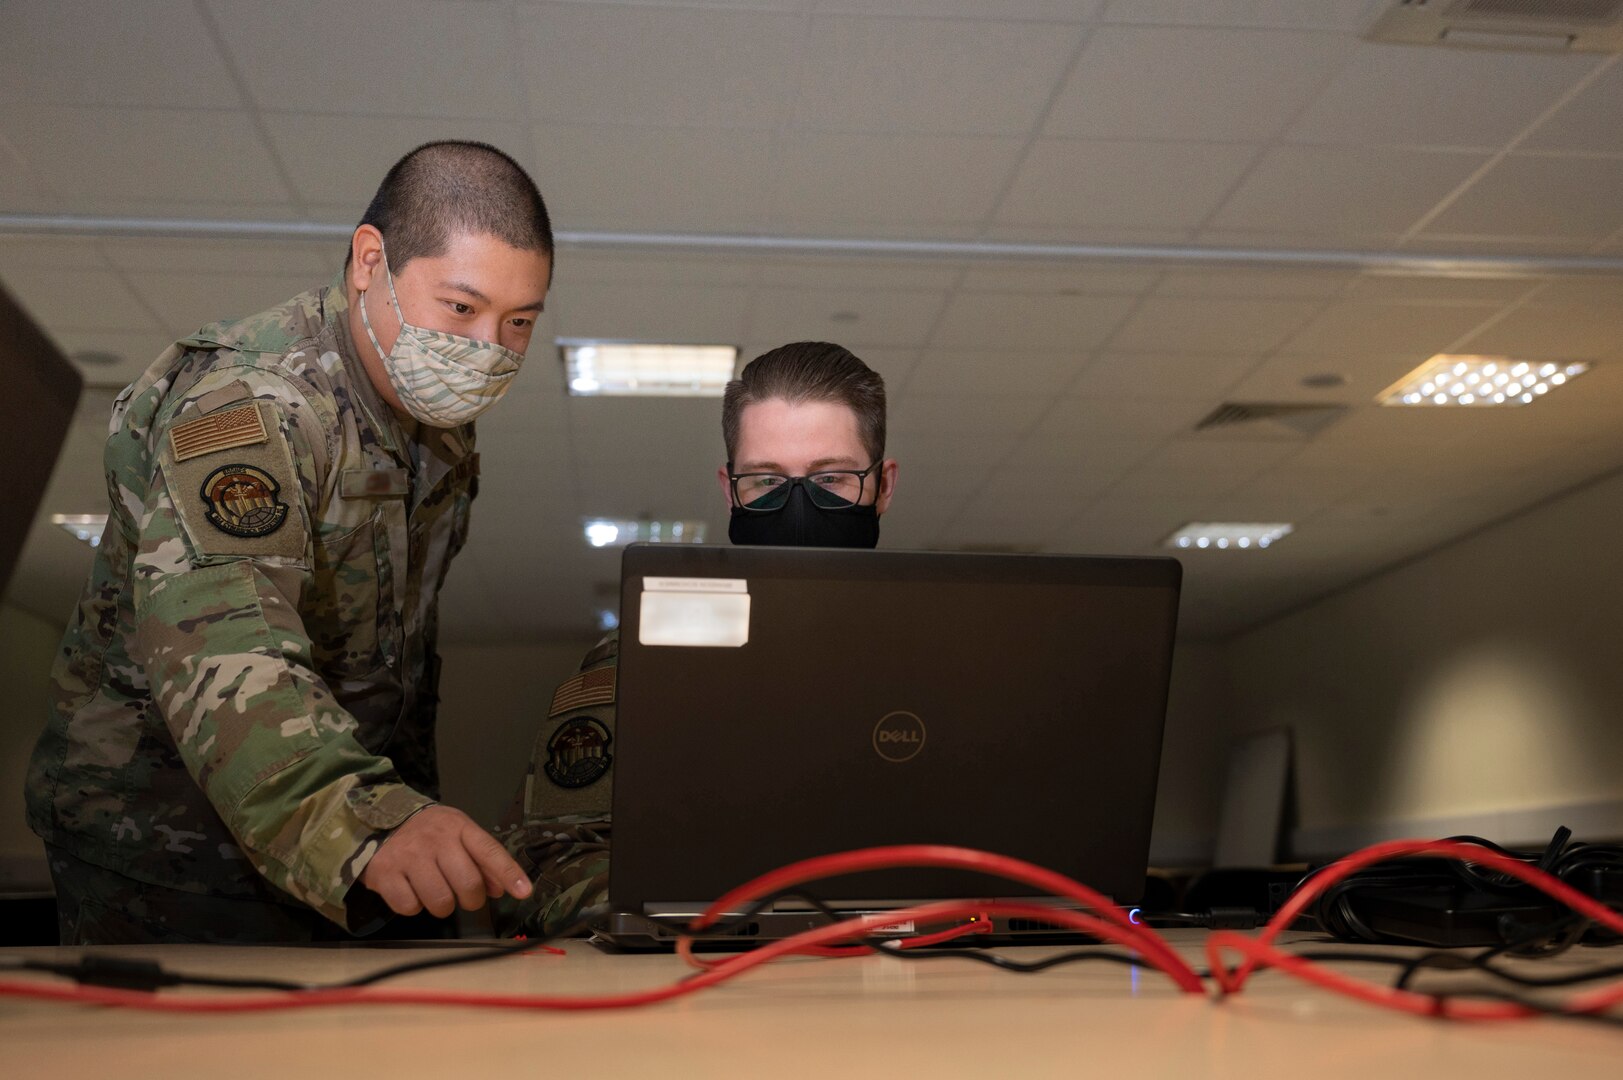 A defensive cyber host noncommissioned officer assigned to the 800th Cyber Protection Team, Joint Force Headquarters Cyber-Air Force, left, assists a defensive cyber host operator while he performs a hunt analysis at RAF Fairford, United Kingdom, Oct. 8, 2021. Cyber defense requires host operators to review security threats to detect adversarial aggression against Air Force systems, such as the B-1B Lancer currently deployed in support of Bomber Task Force Europe. (U.S. Air Force photo by Senior Airman Colin Hollowell)